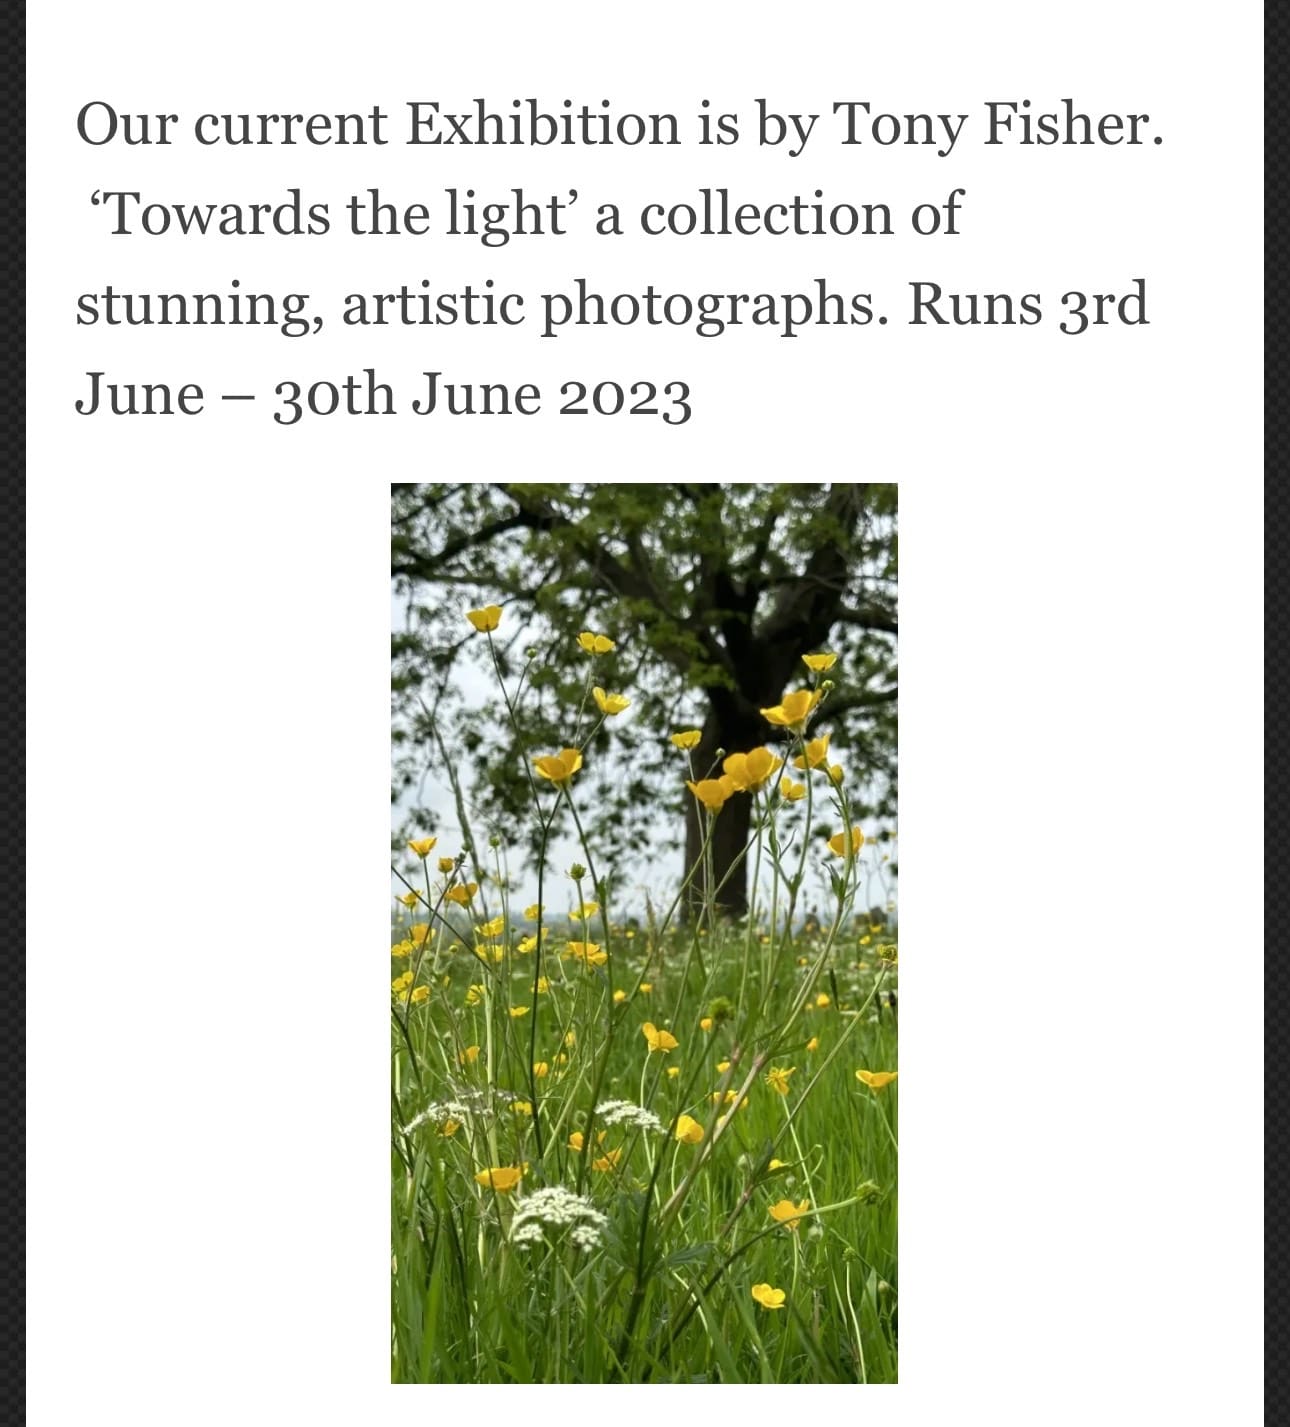 Towards the Light - Exhibition by Tony Fisher